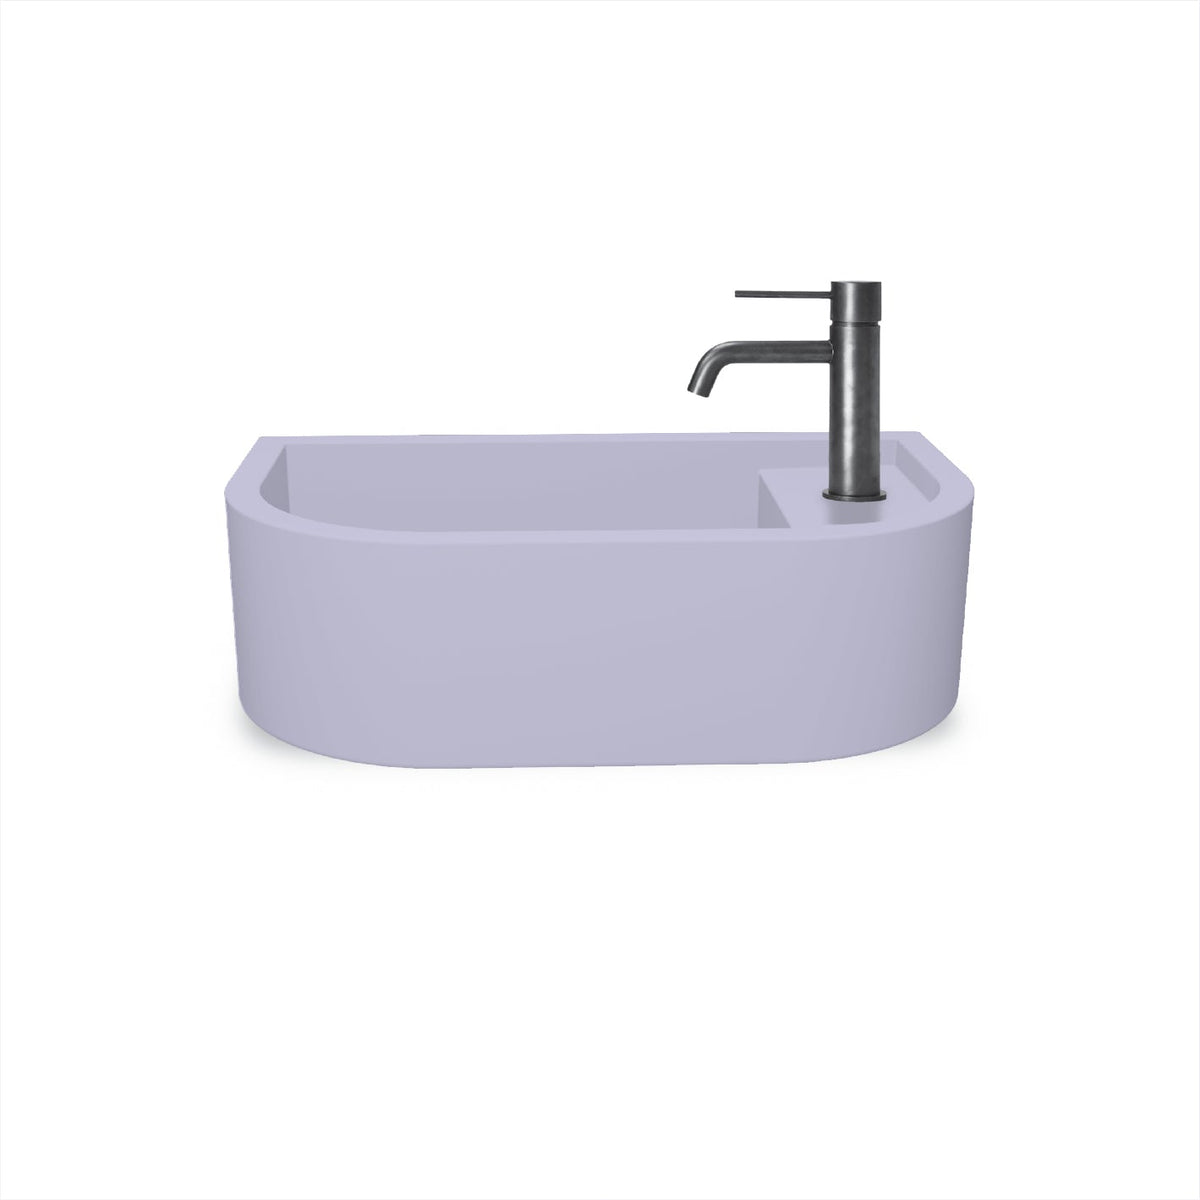 Loop 01 Basin - Overflow - Surface Mount (Lilac,Tap Hole,Black)